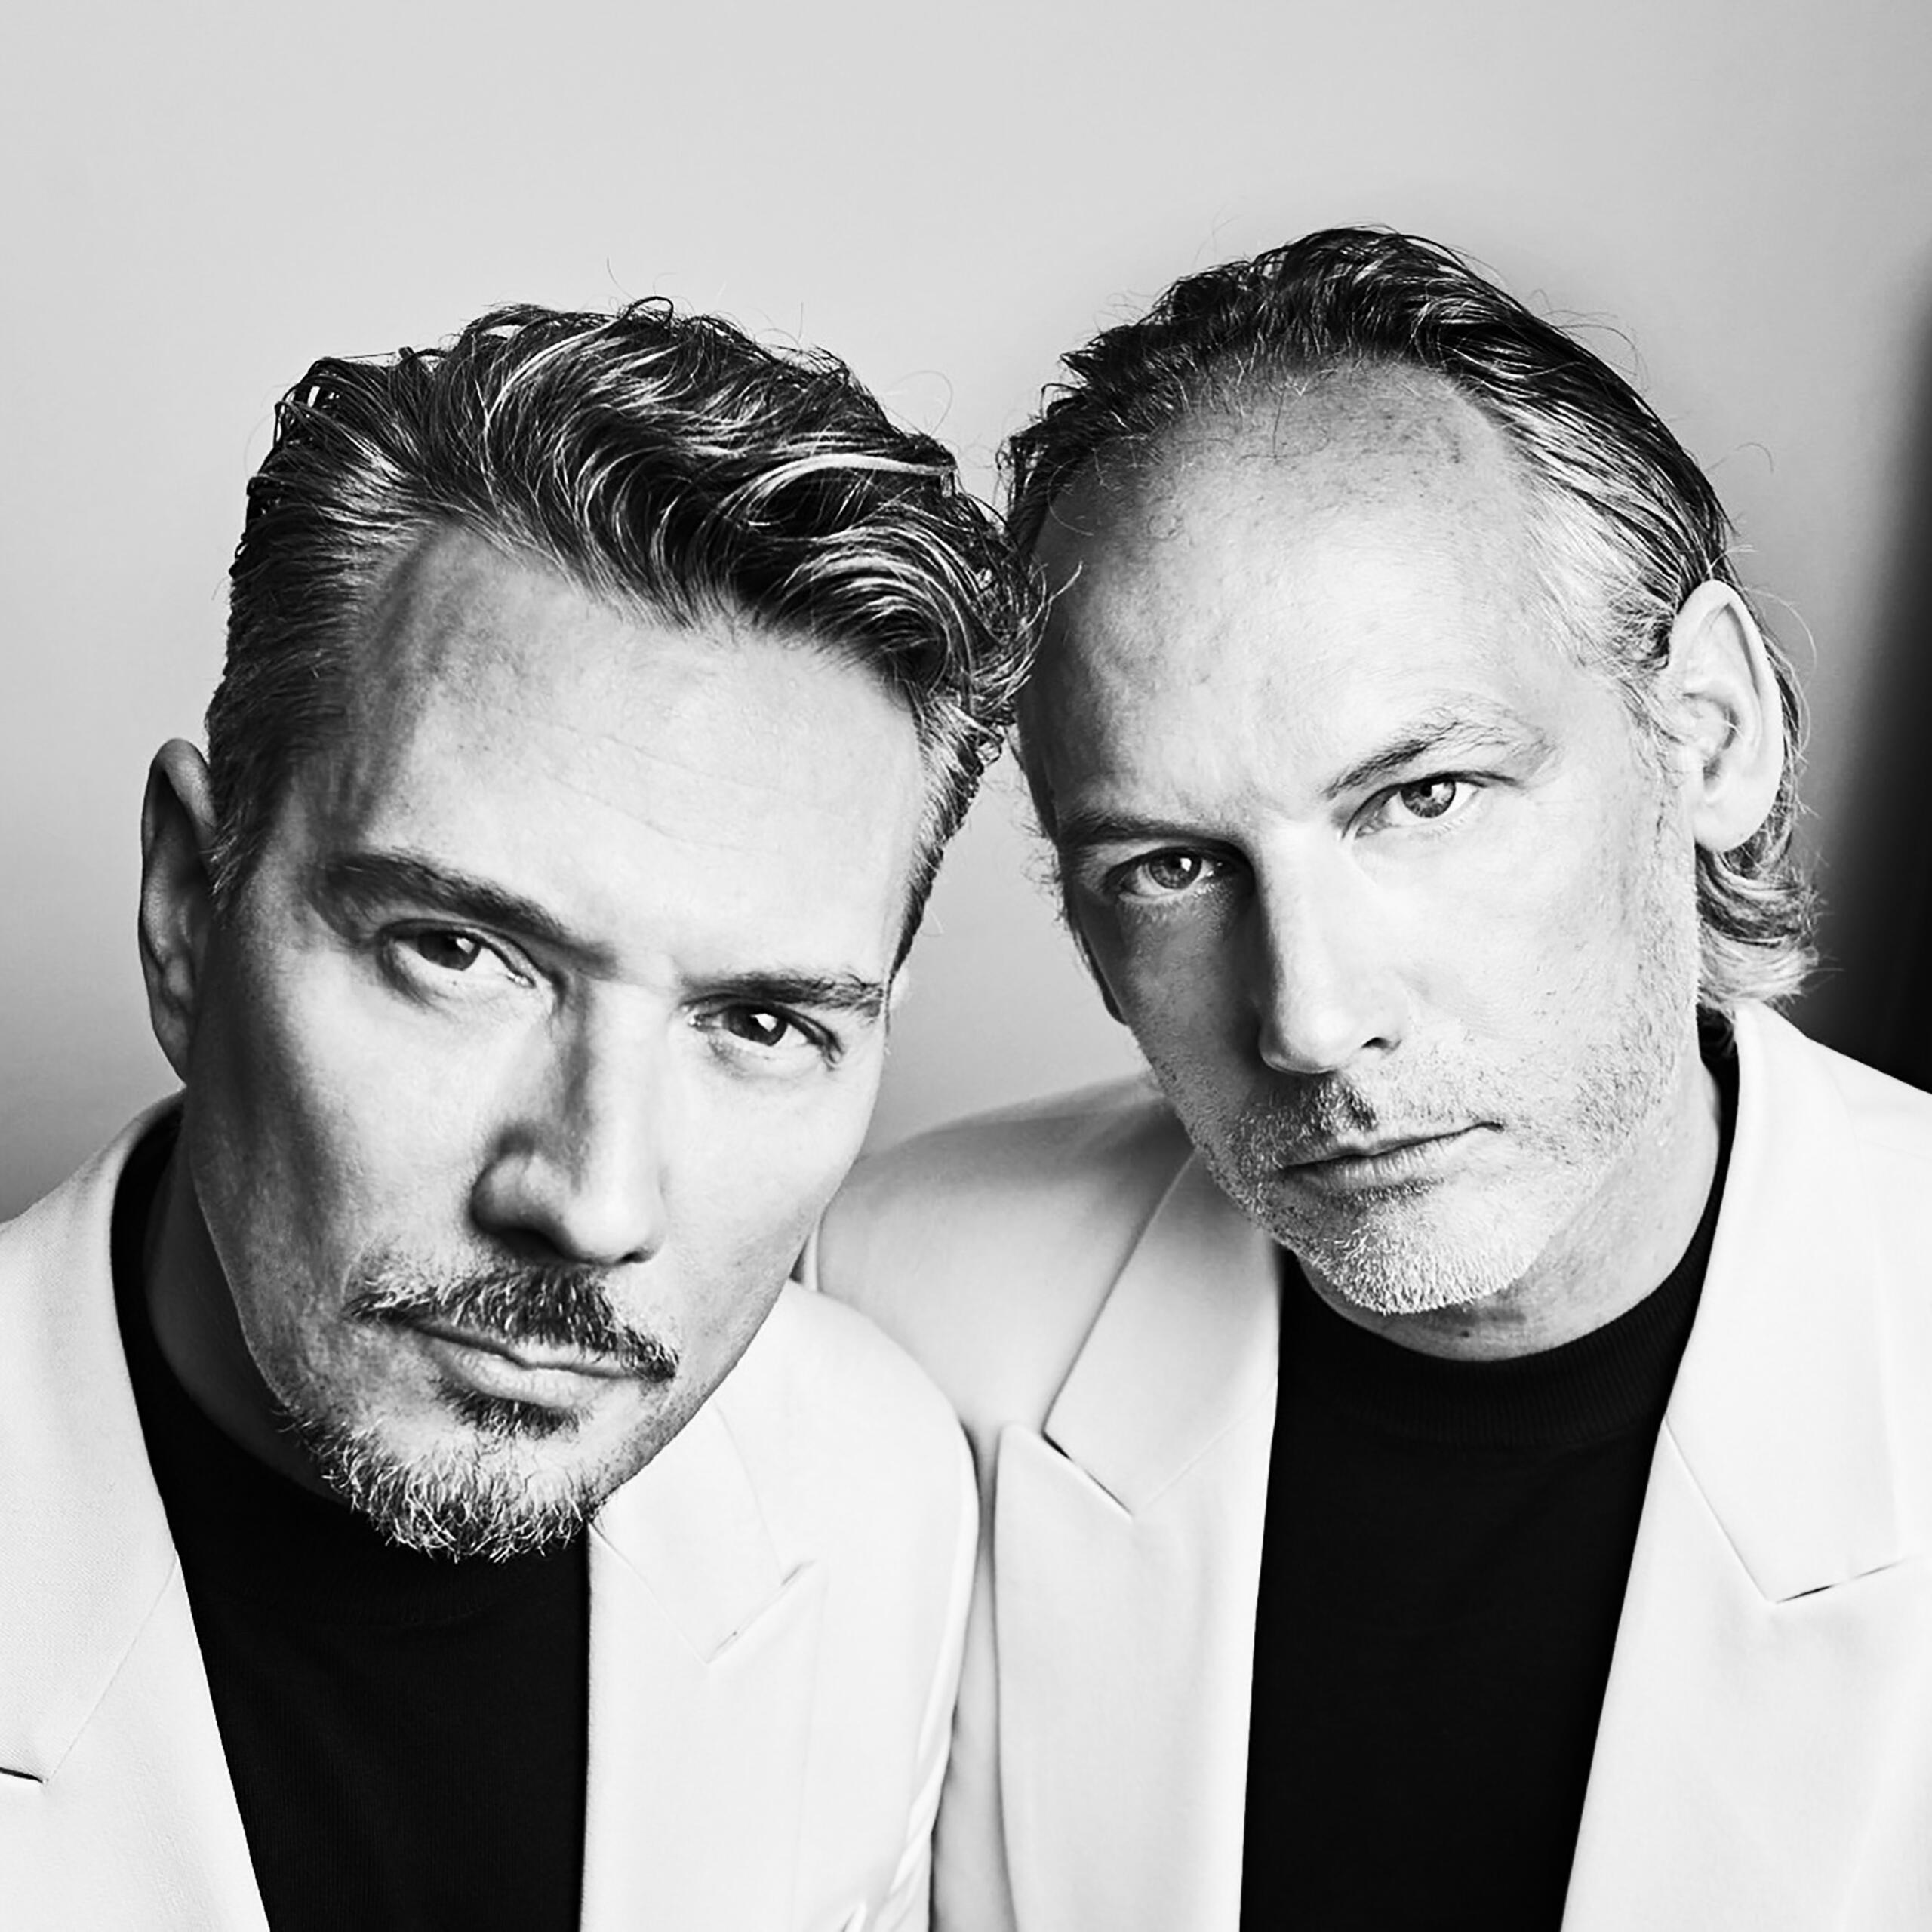 Black and white portrait of two men.